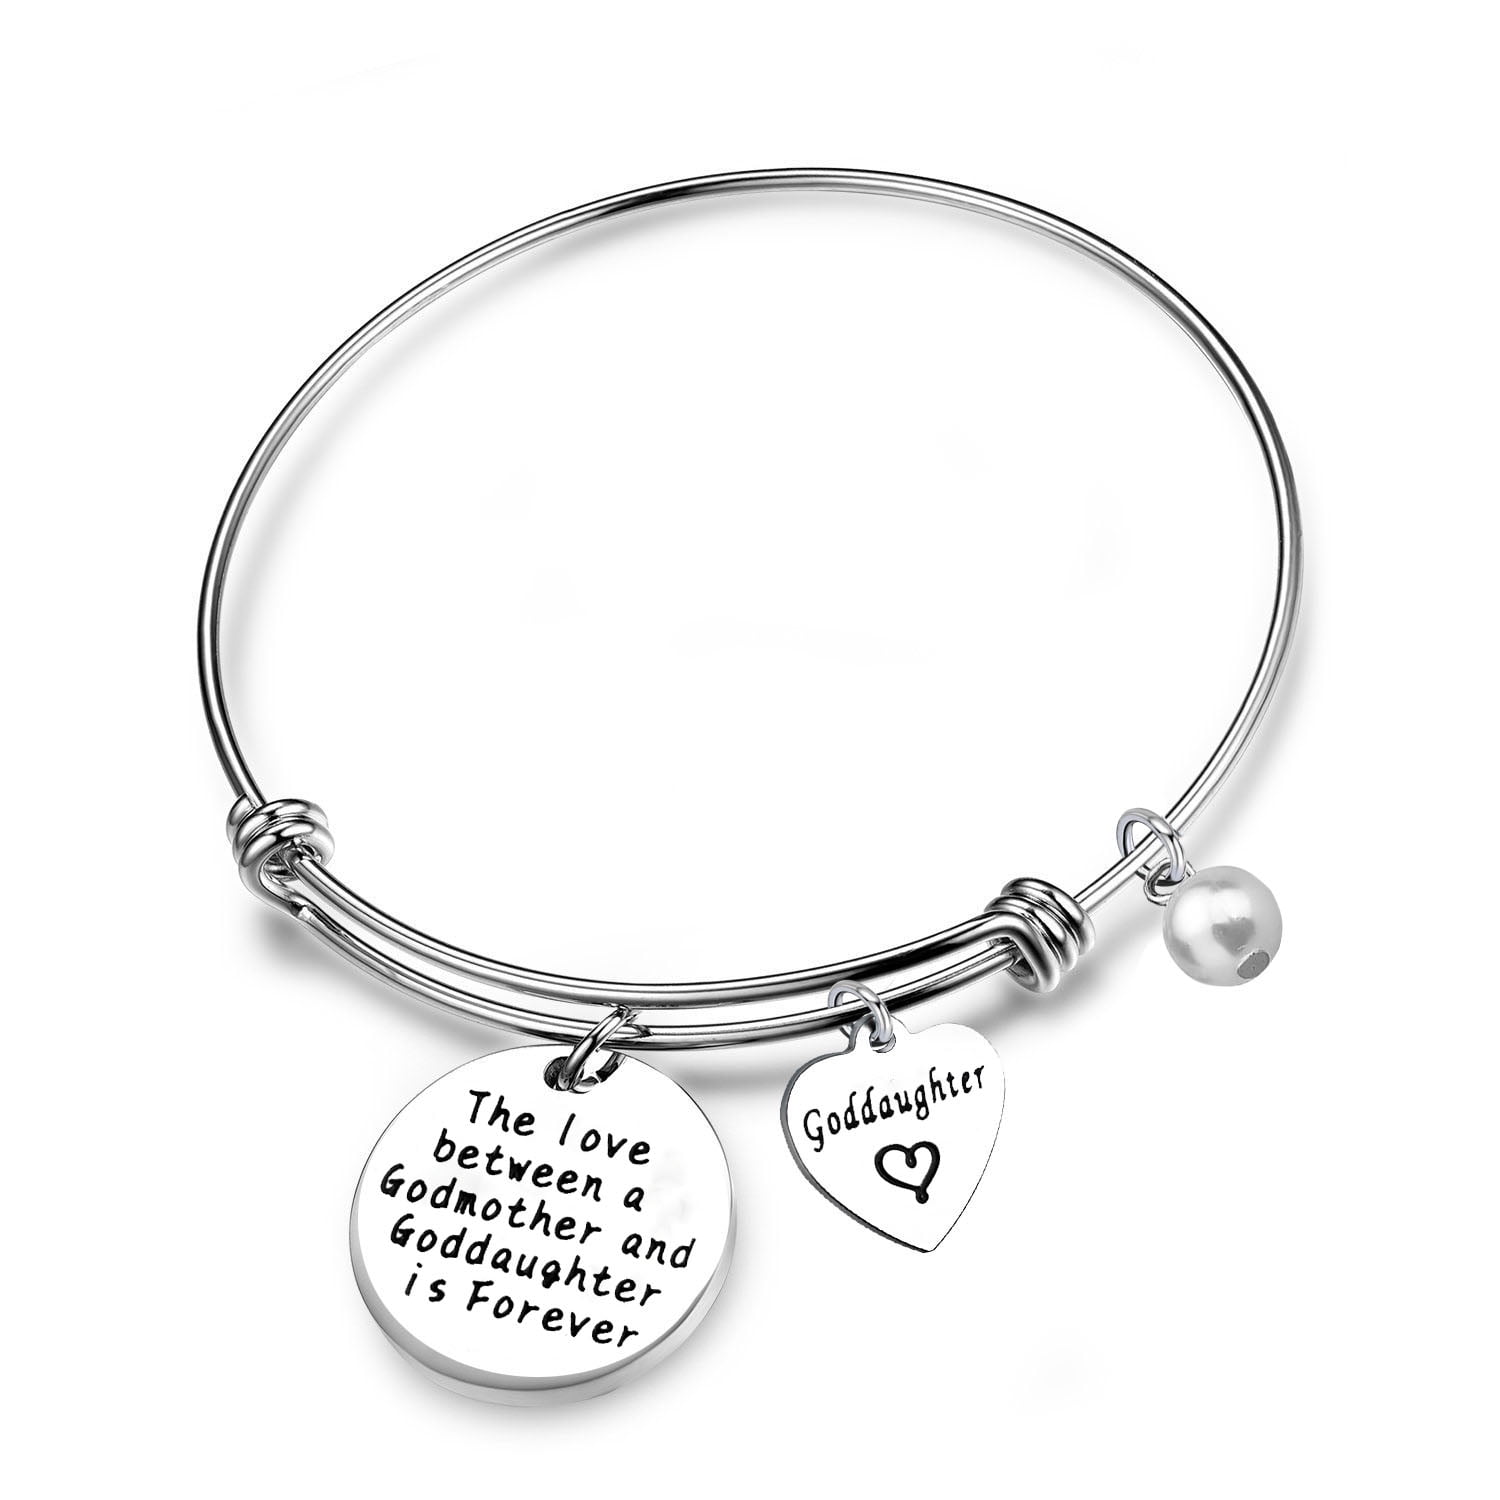 The Love Between a Godmother and Goddaughter is Forever Expandable Silver Charm Bracelet Gift 